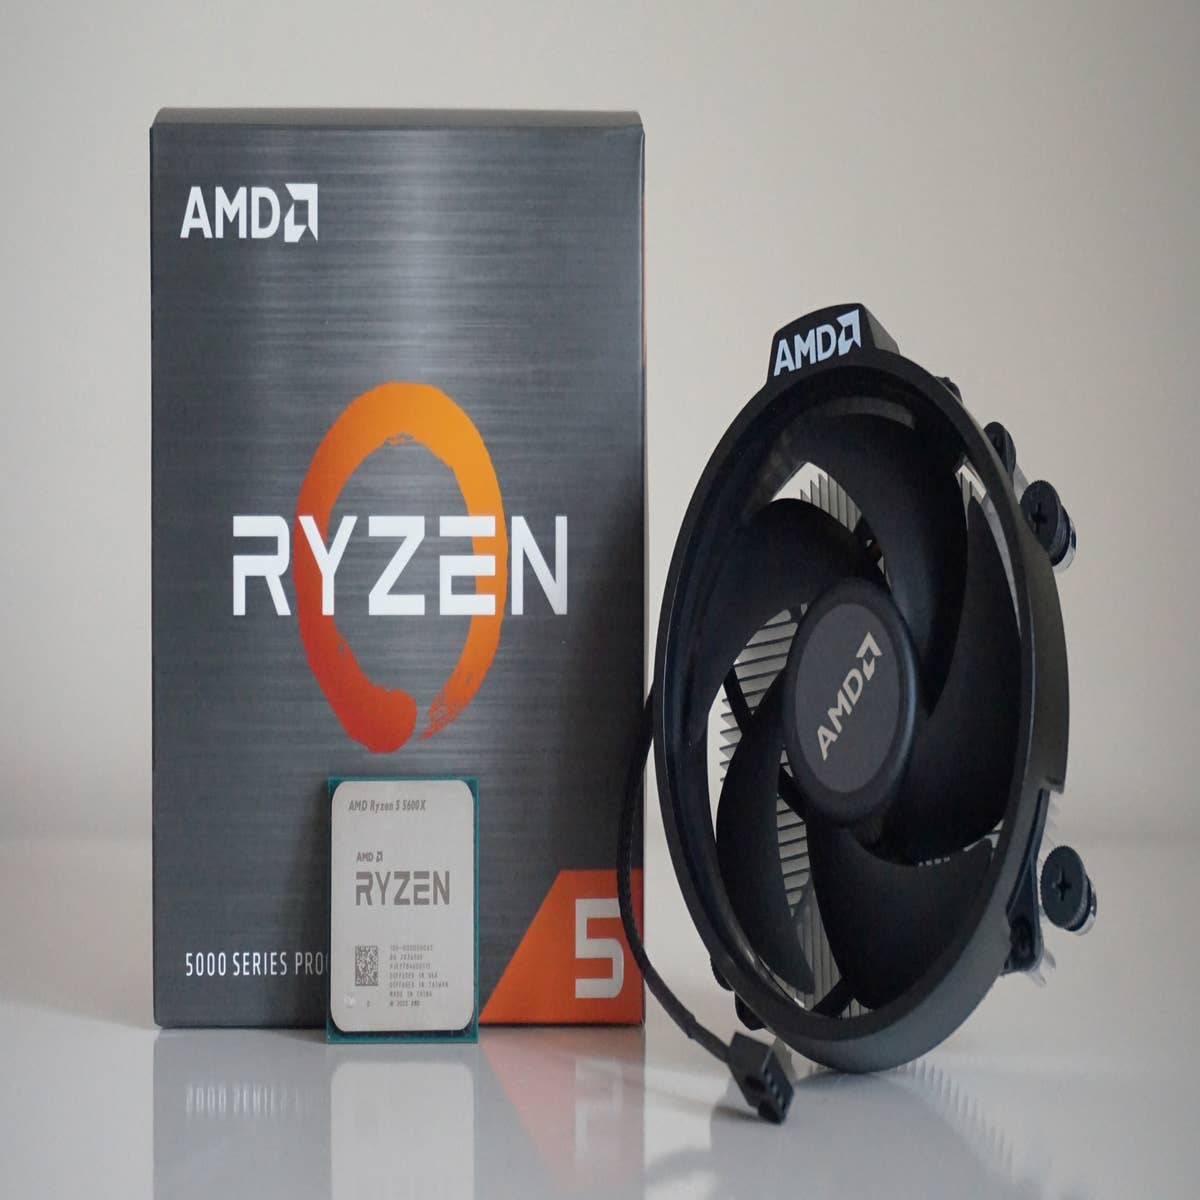 AMD Ryzen 5 5600 could launch in 2021 at 220 USD 